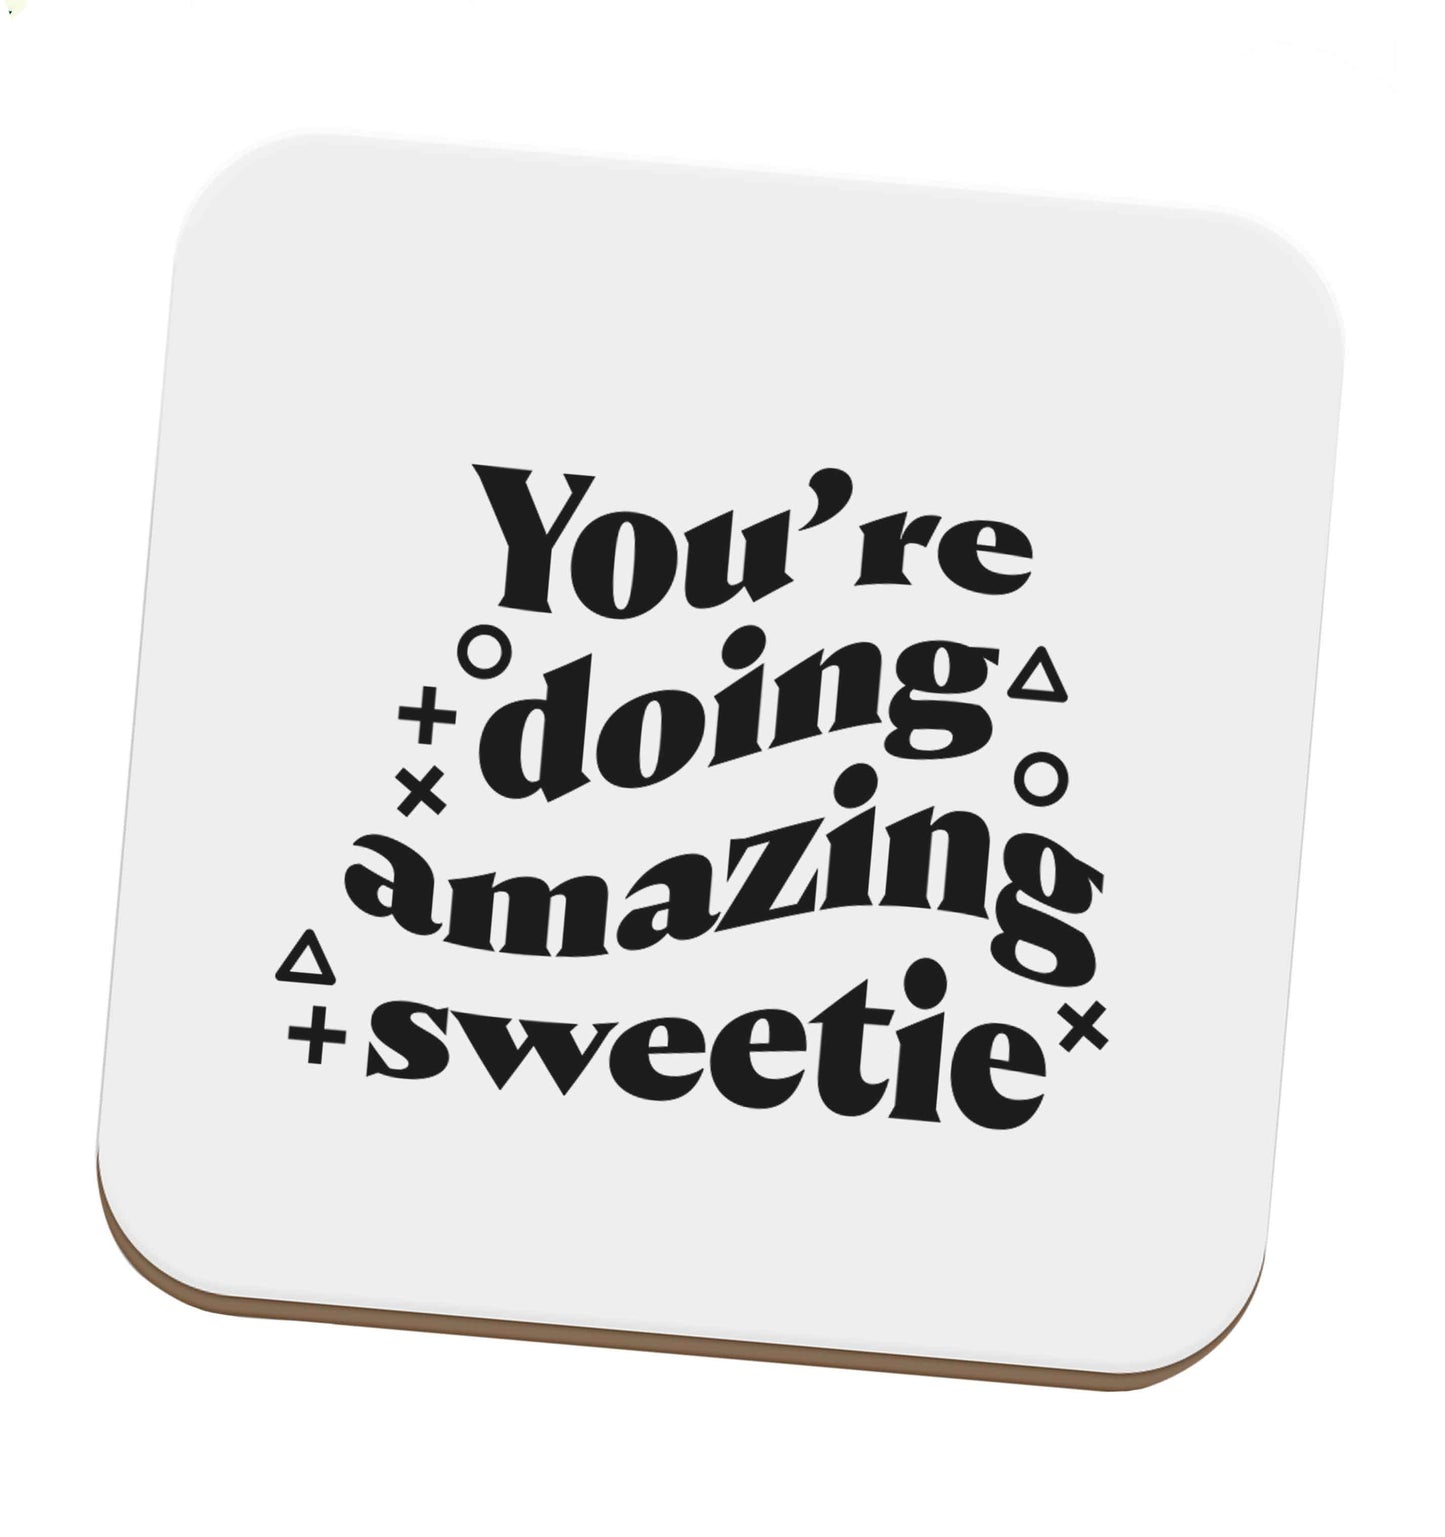 You're doing amazing sweetie set of four coasters